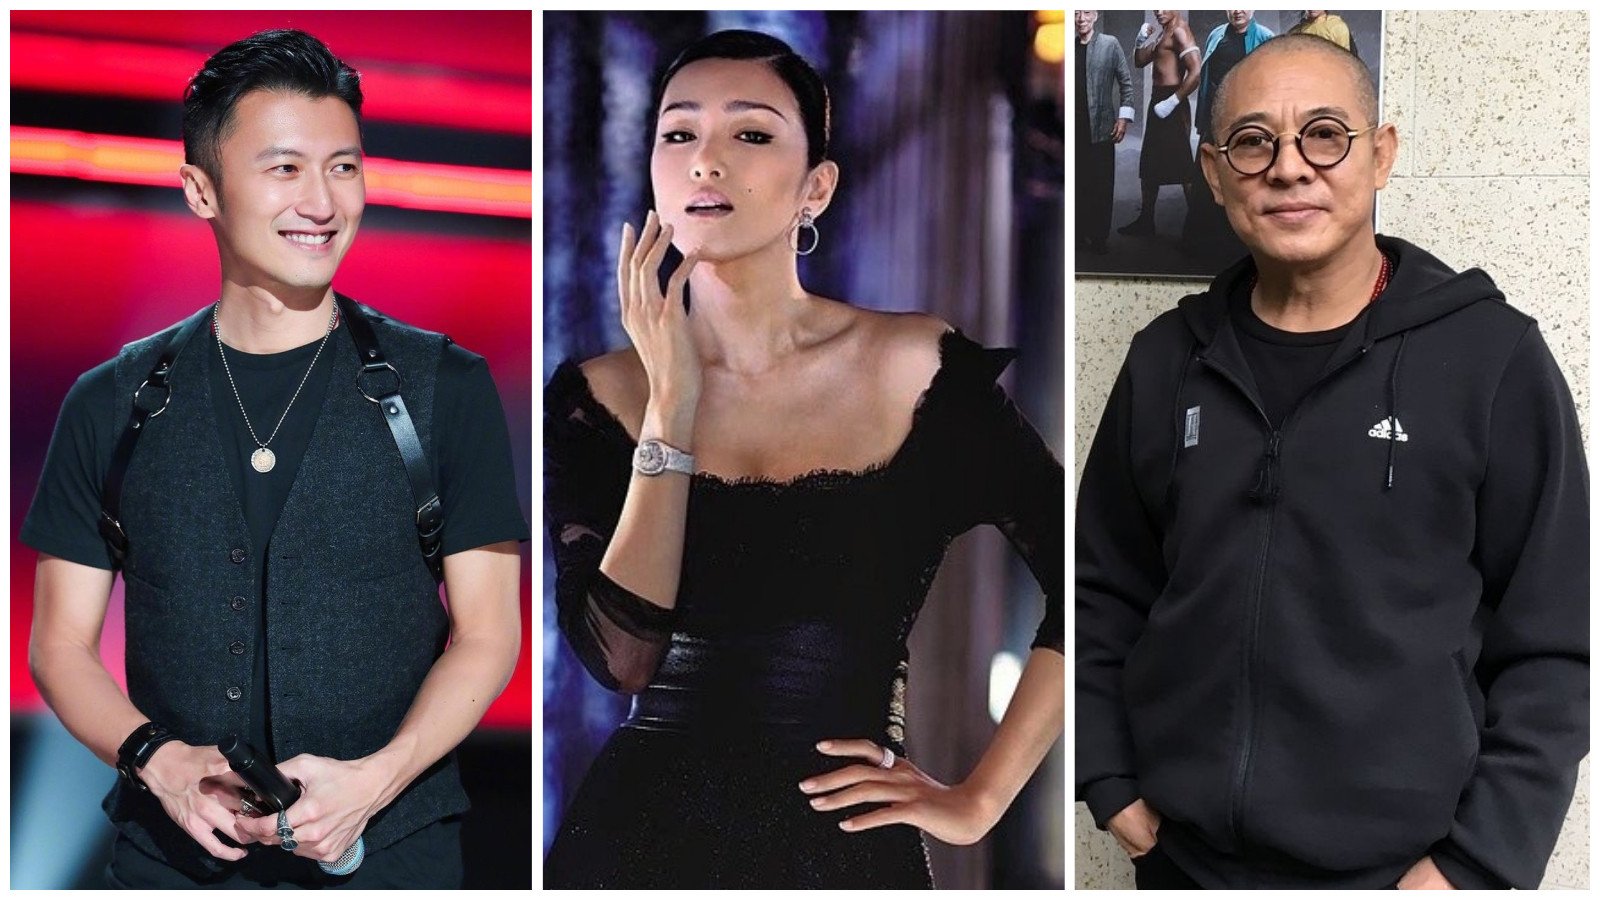 Chinese celebrities, from left, Nicholas Tse, Gong Li and Jet Li, all have foreign citizenship, attracting varying degrees of criticism on social media. Photos: @nicholastsefansclub, @officialgongli, @jetli/Instagram